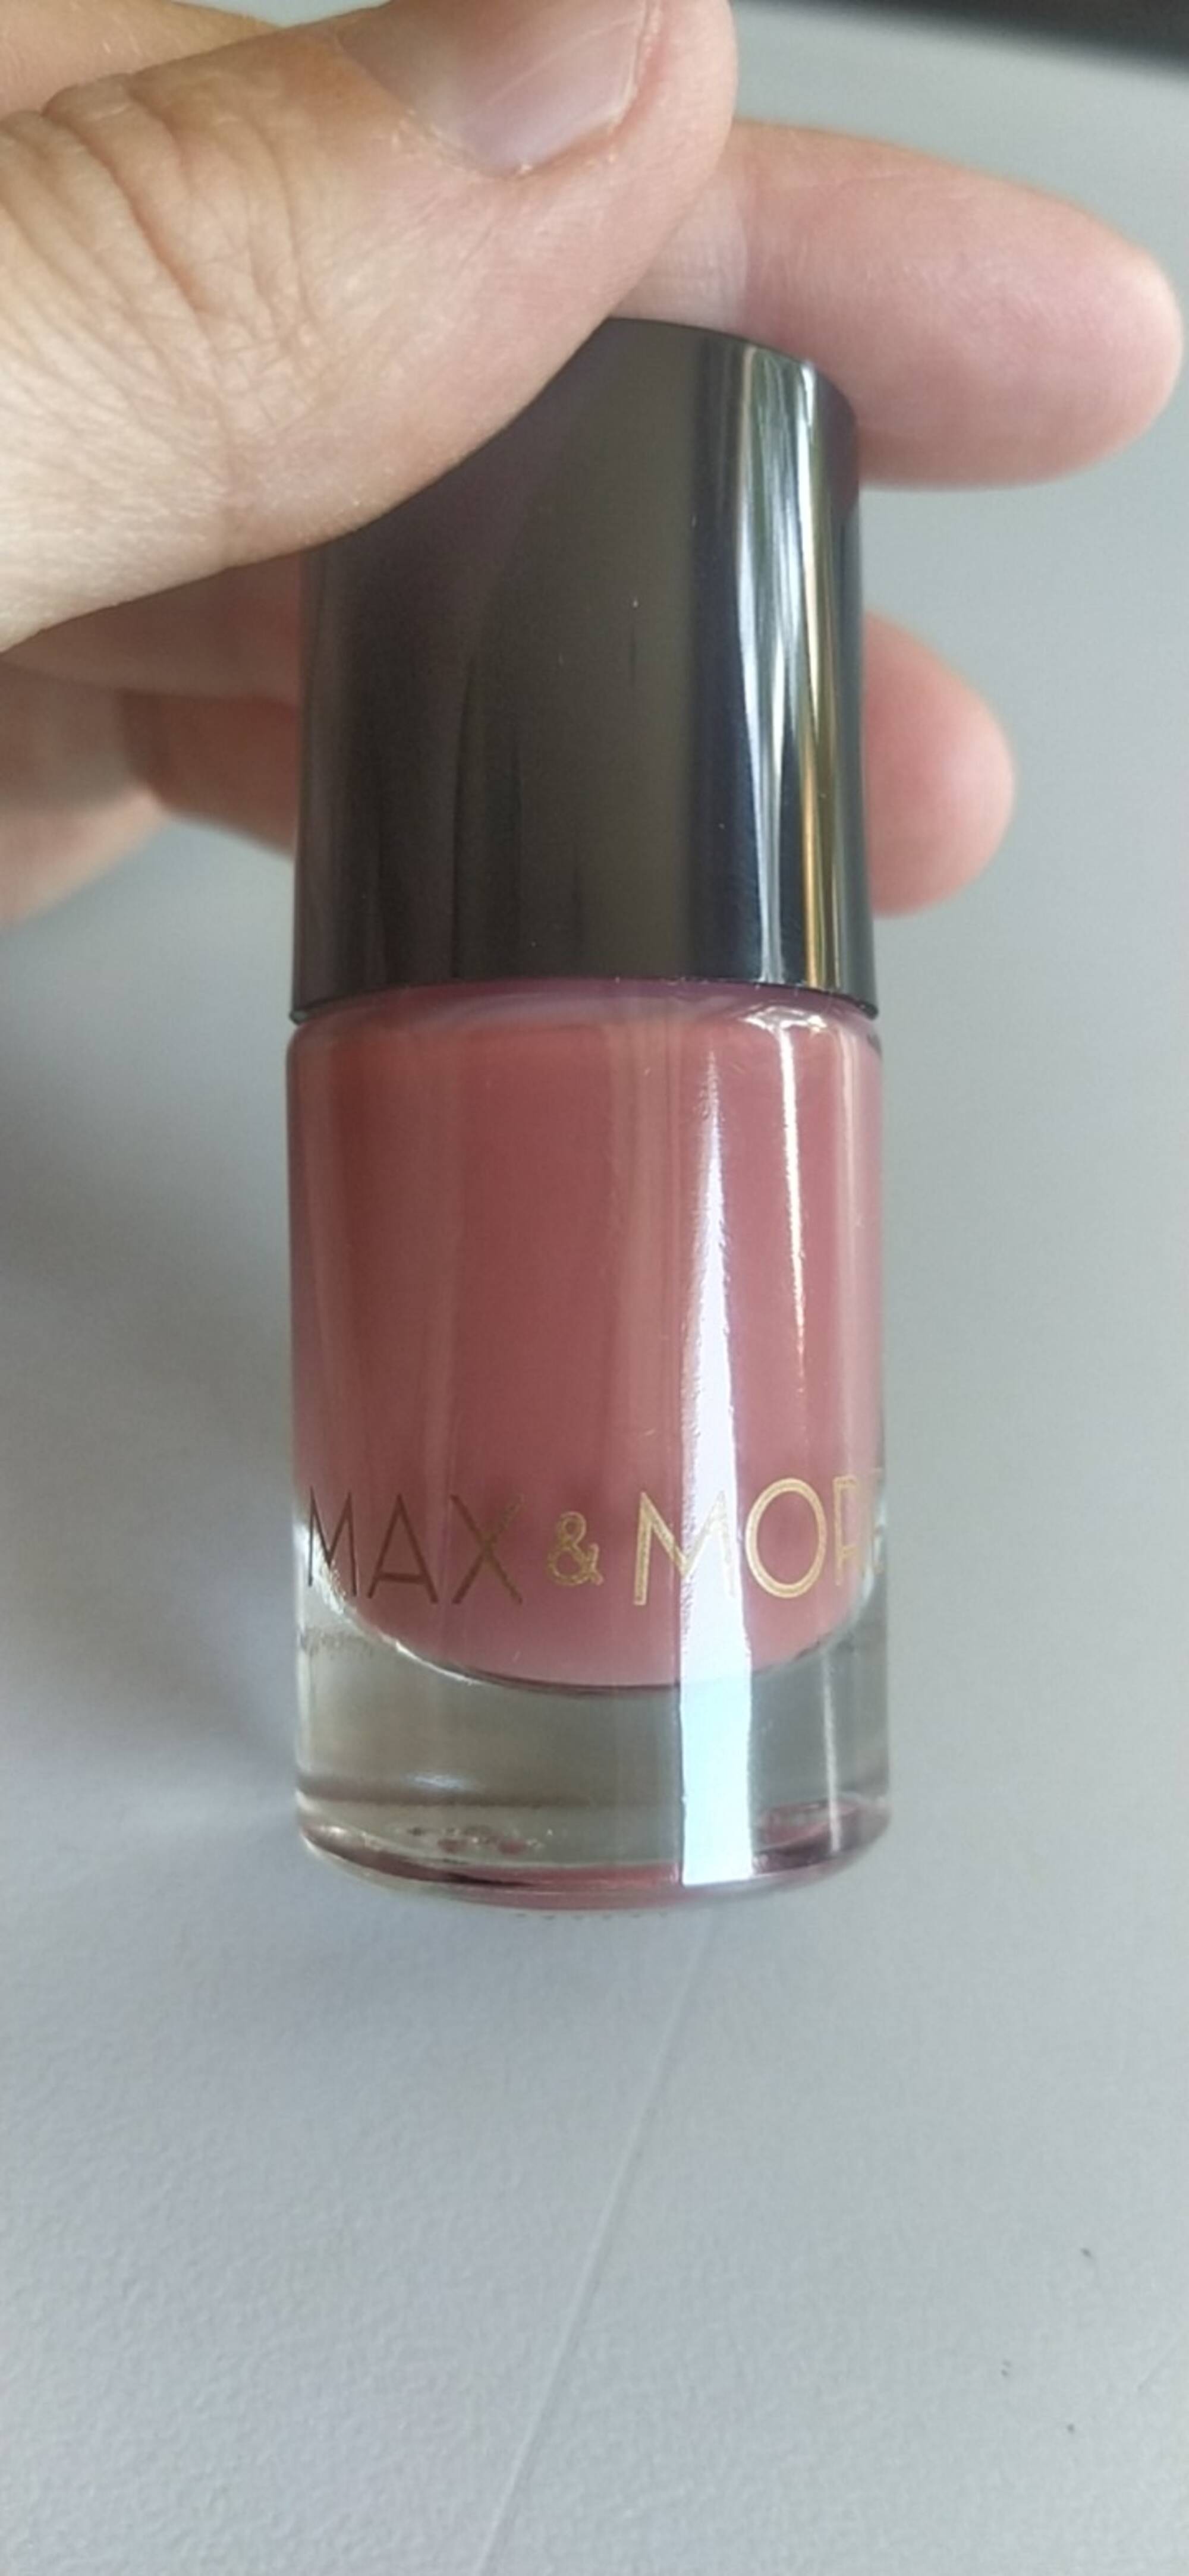 MAX & MORE - vernis à ongle